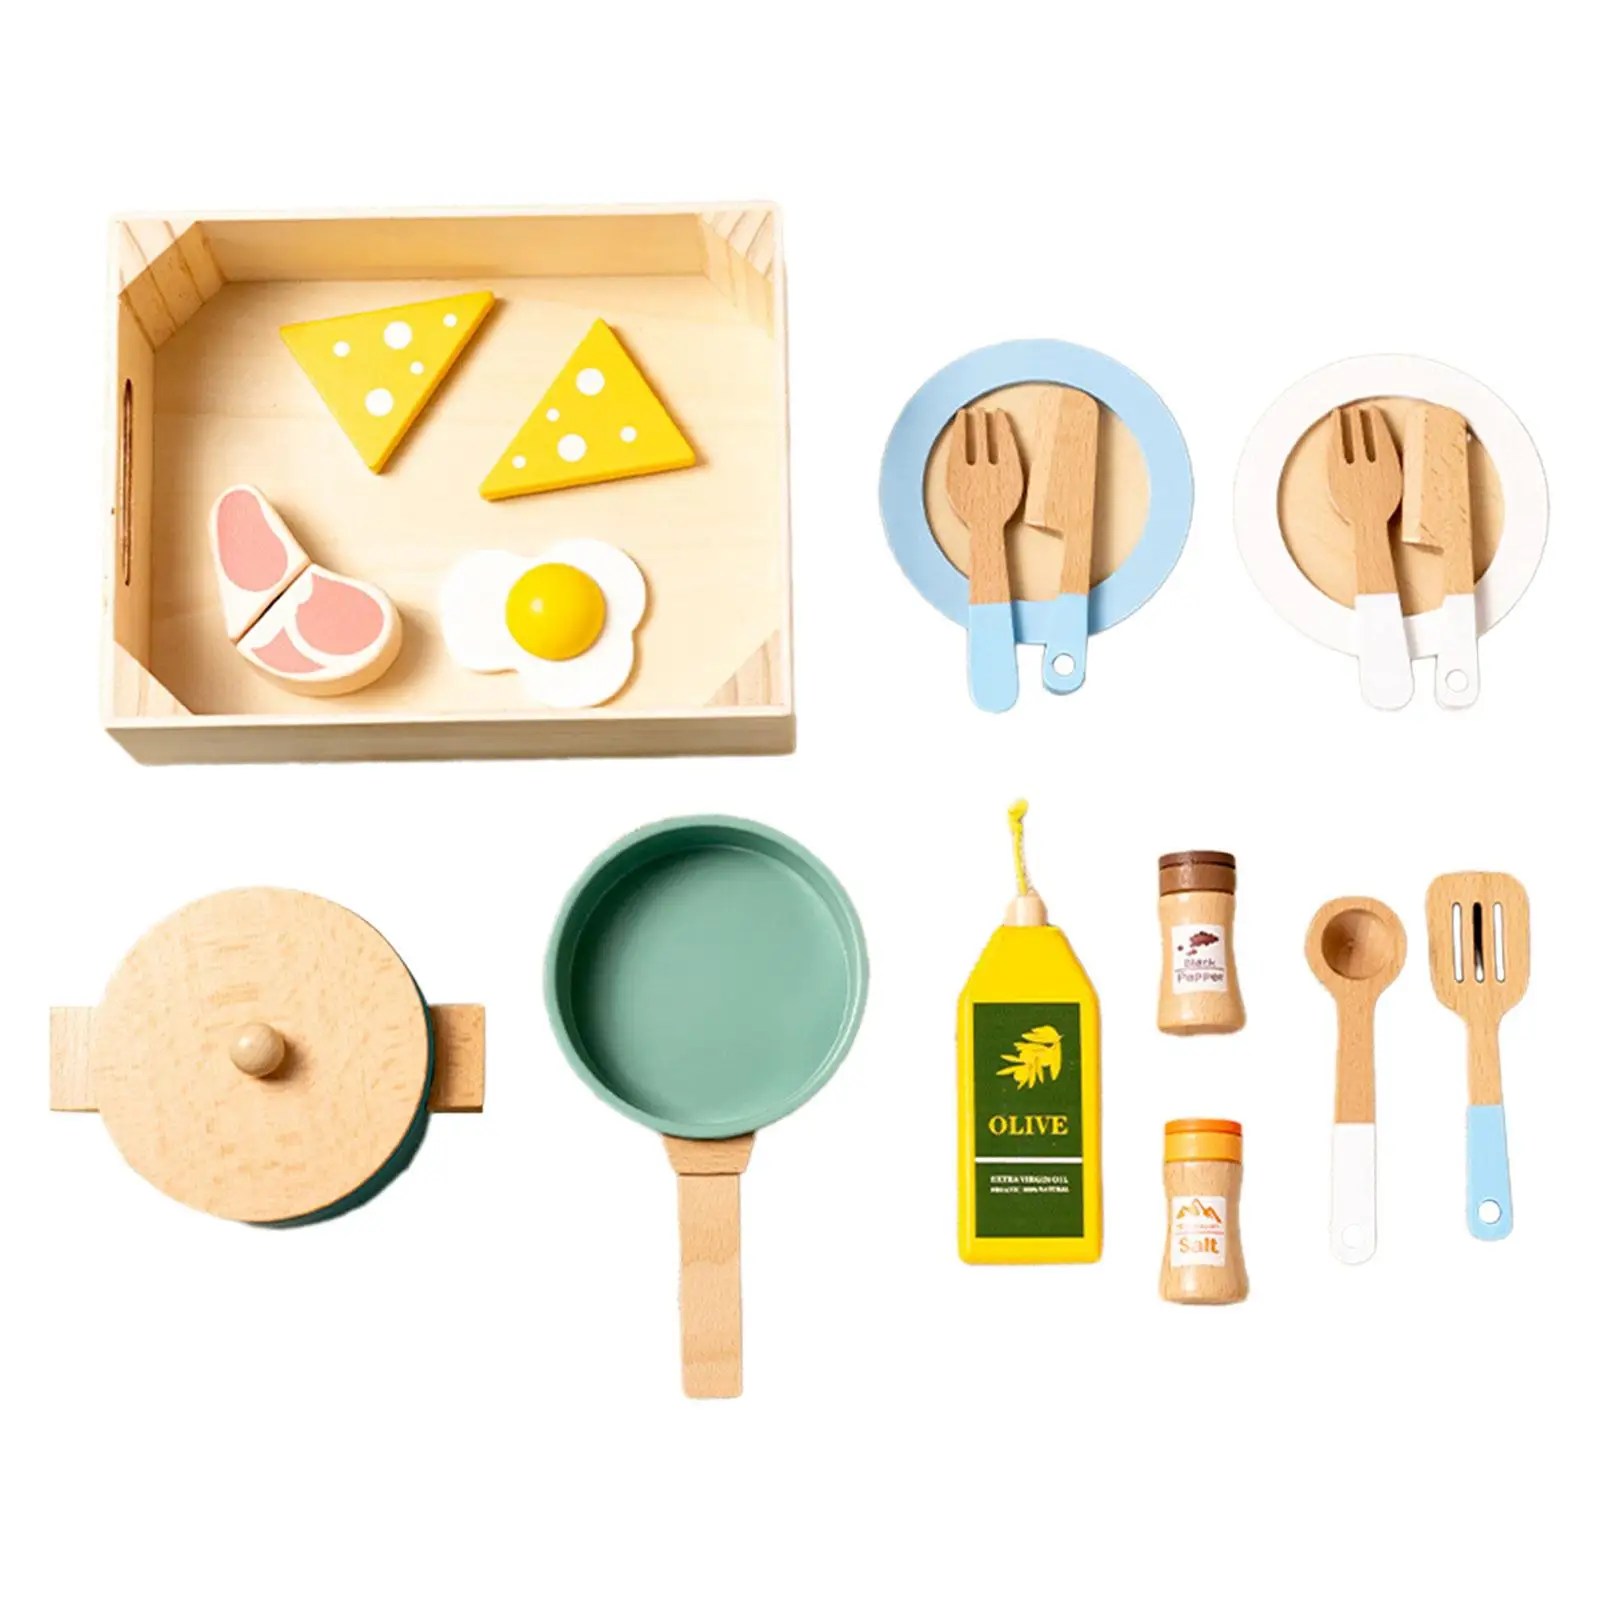 Kids Pretend Play Simulation Montessori Realistic Educational Cookware Utensils Toys for Window Display Party Favors Birthday